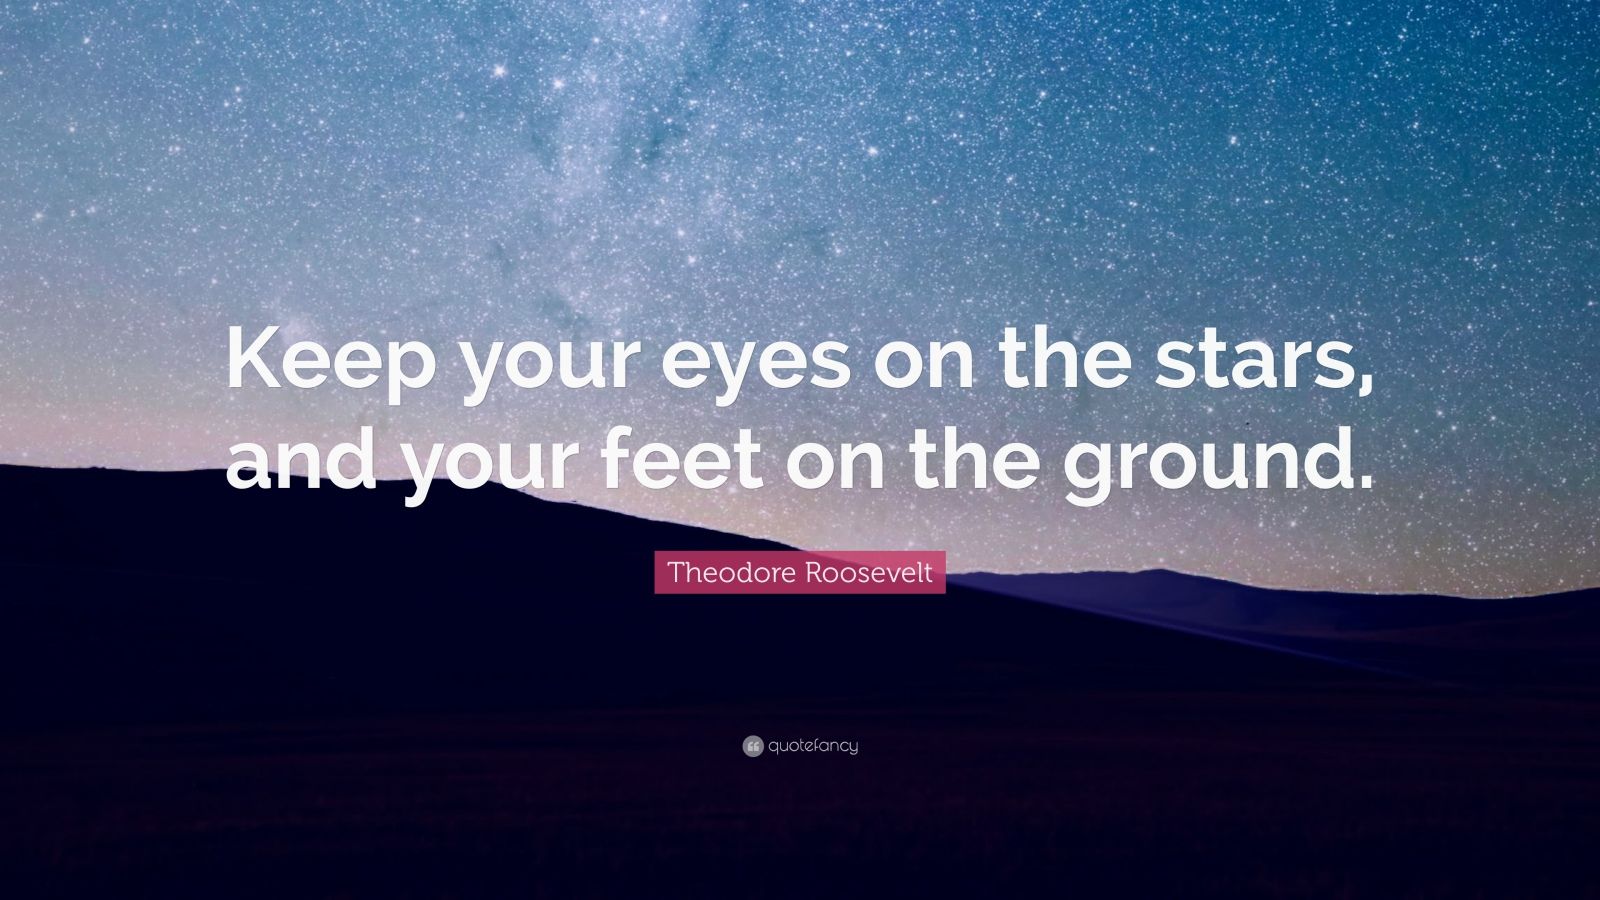 Theodore Roosevelt Quote: “Keep your eyes on the stars, and your feet ...